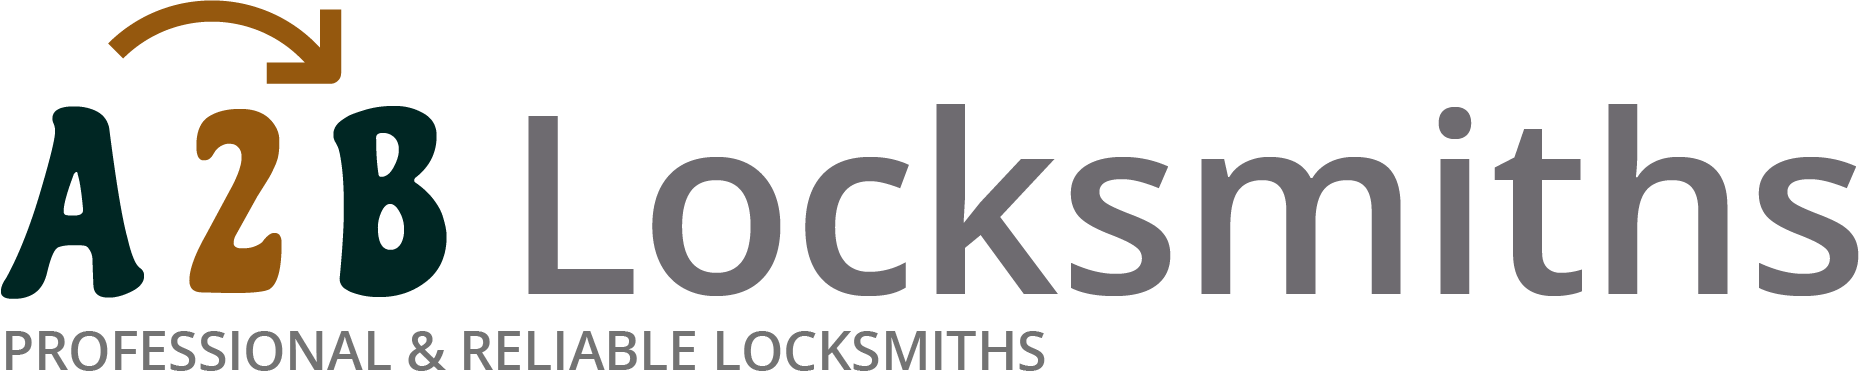 If you are locked out of house in Islington, our 24/7 local emergency locksmith services can help you.